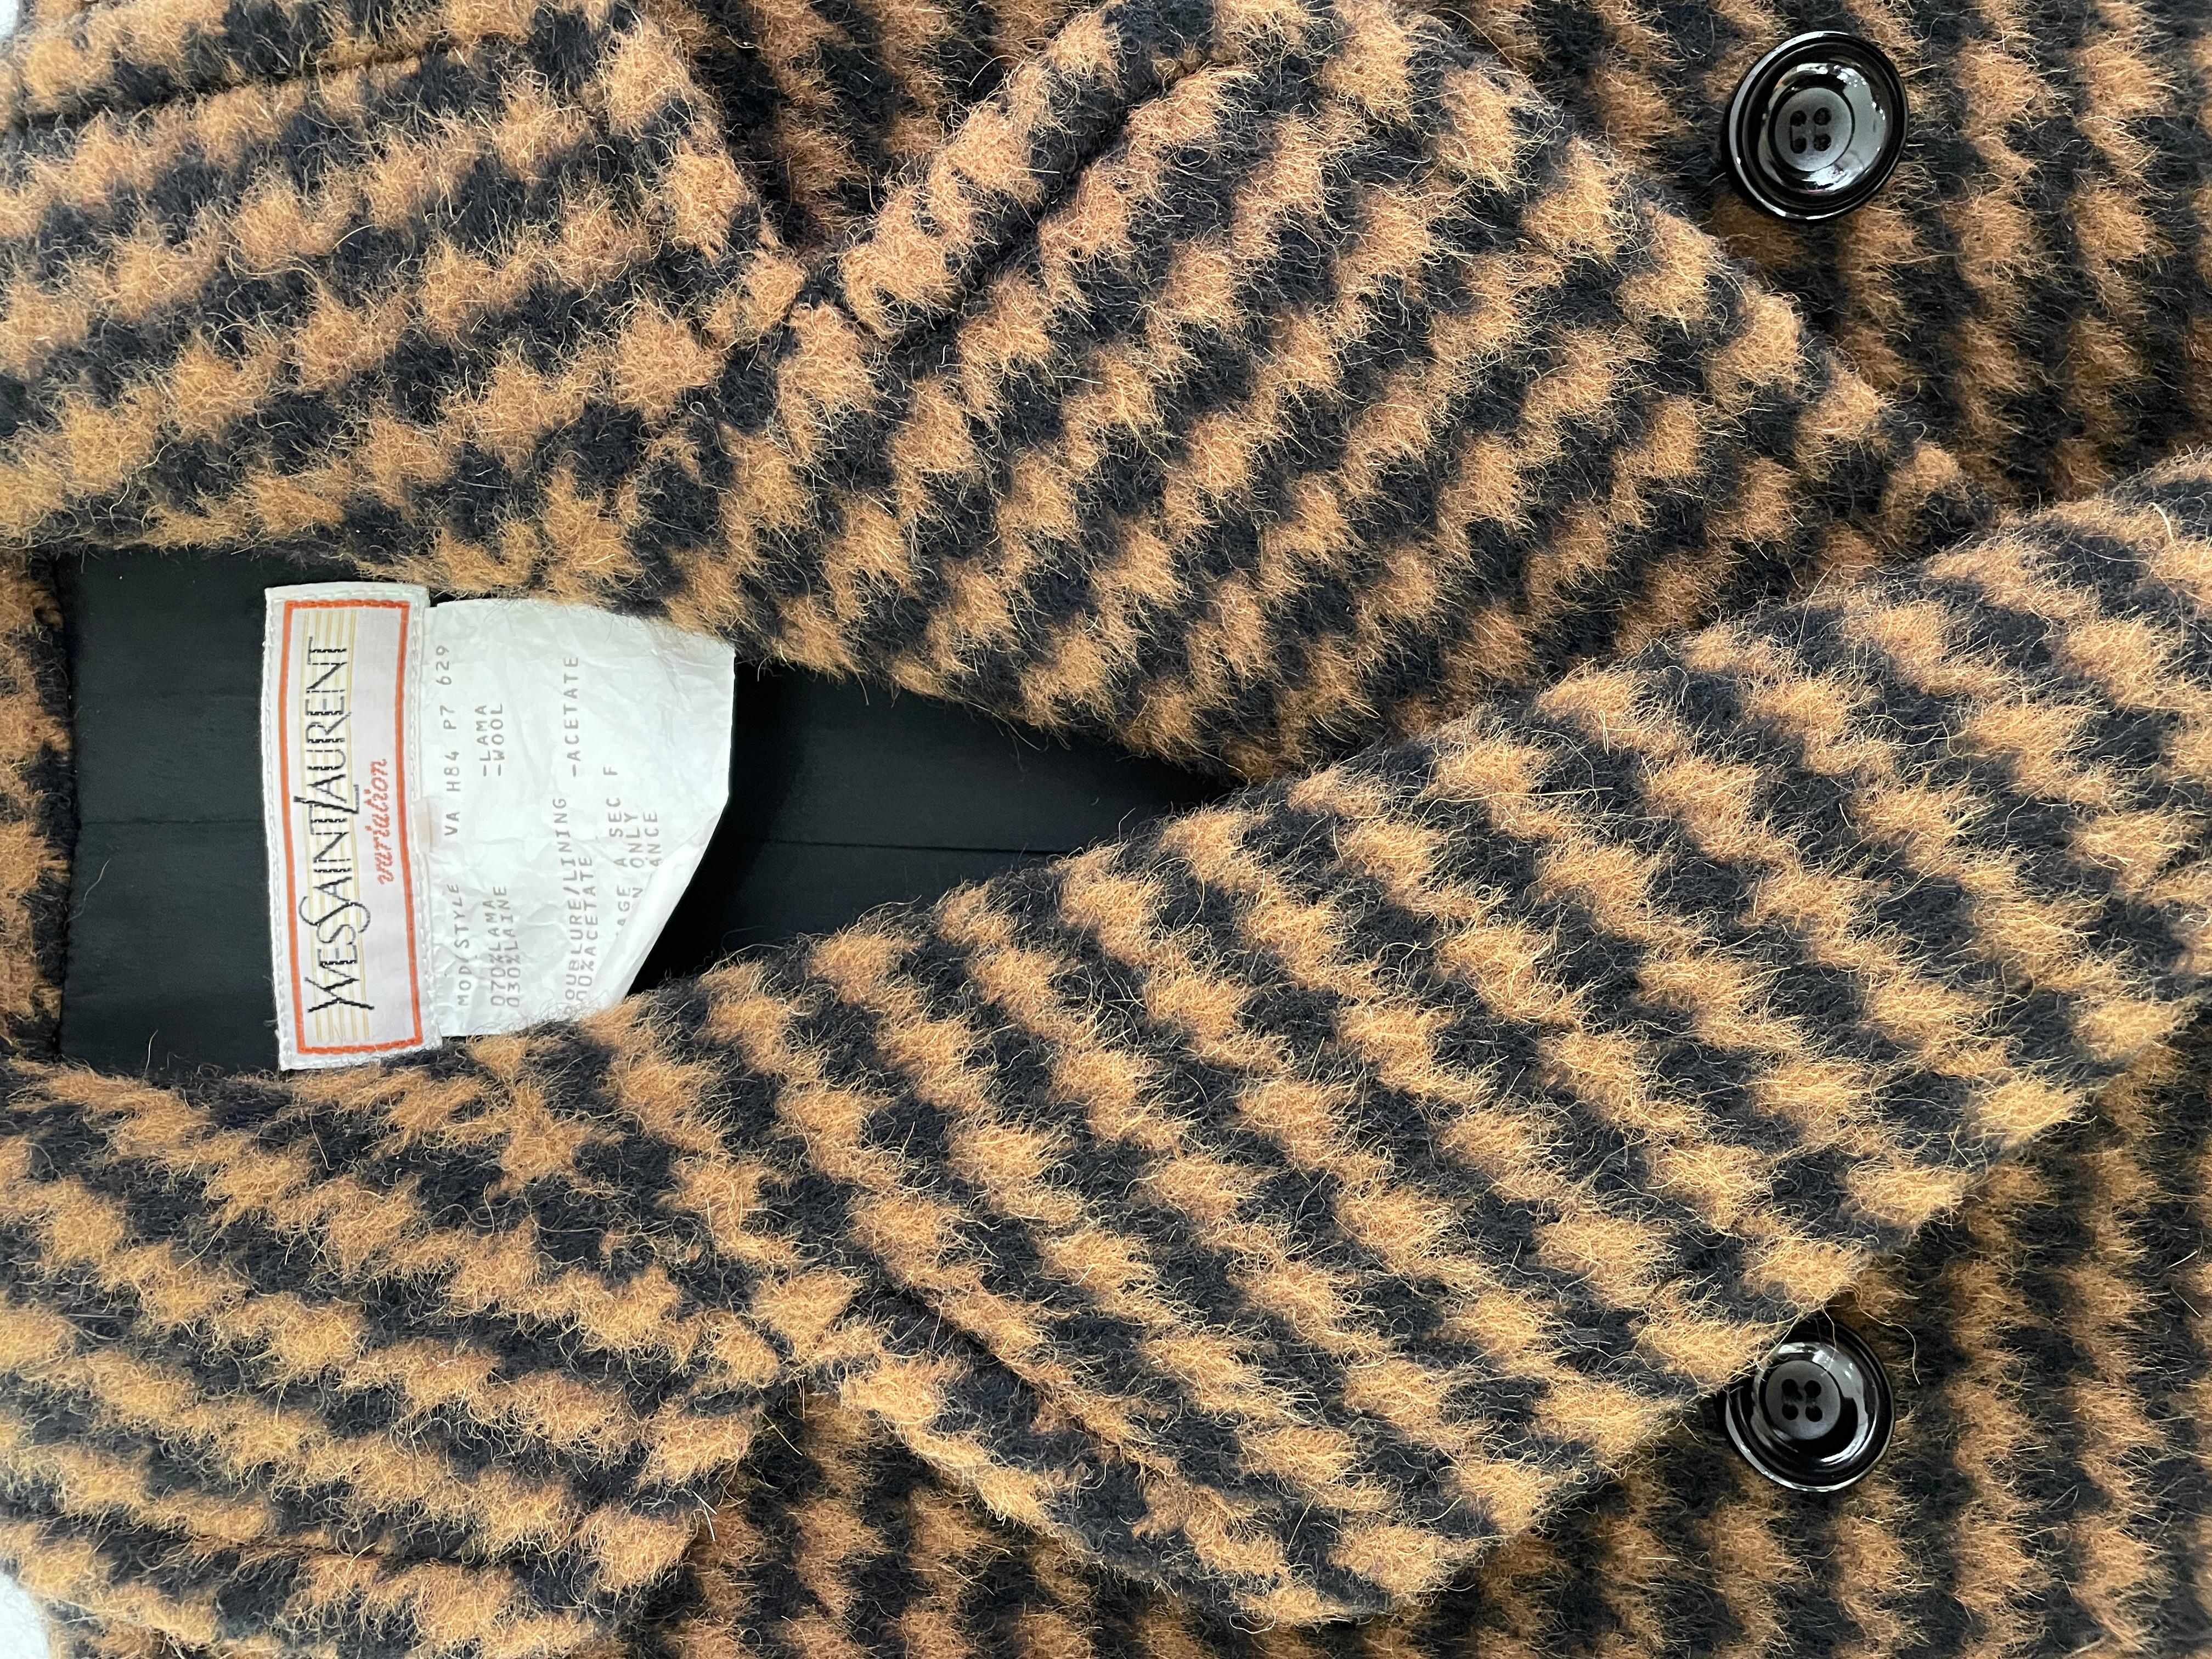 Amazing and super rare Yves Saint Laurent Lama Coat
1970s
Size: 36
Measures: sholulders 40cm length 105cm
Materials: 70% Lama 30% Wool
-
Perfect general condition.
A little imperfection inside (see pictures).
-
